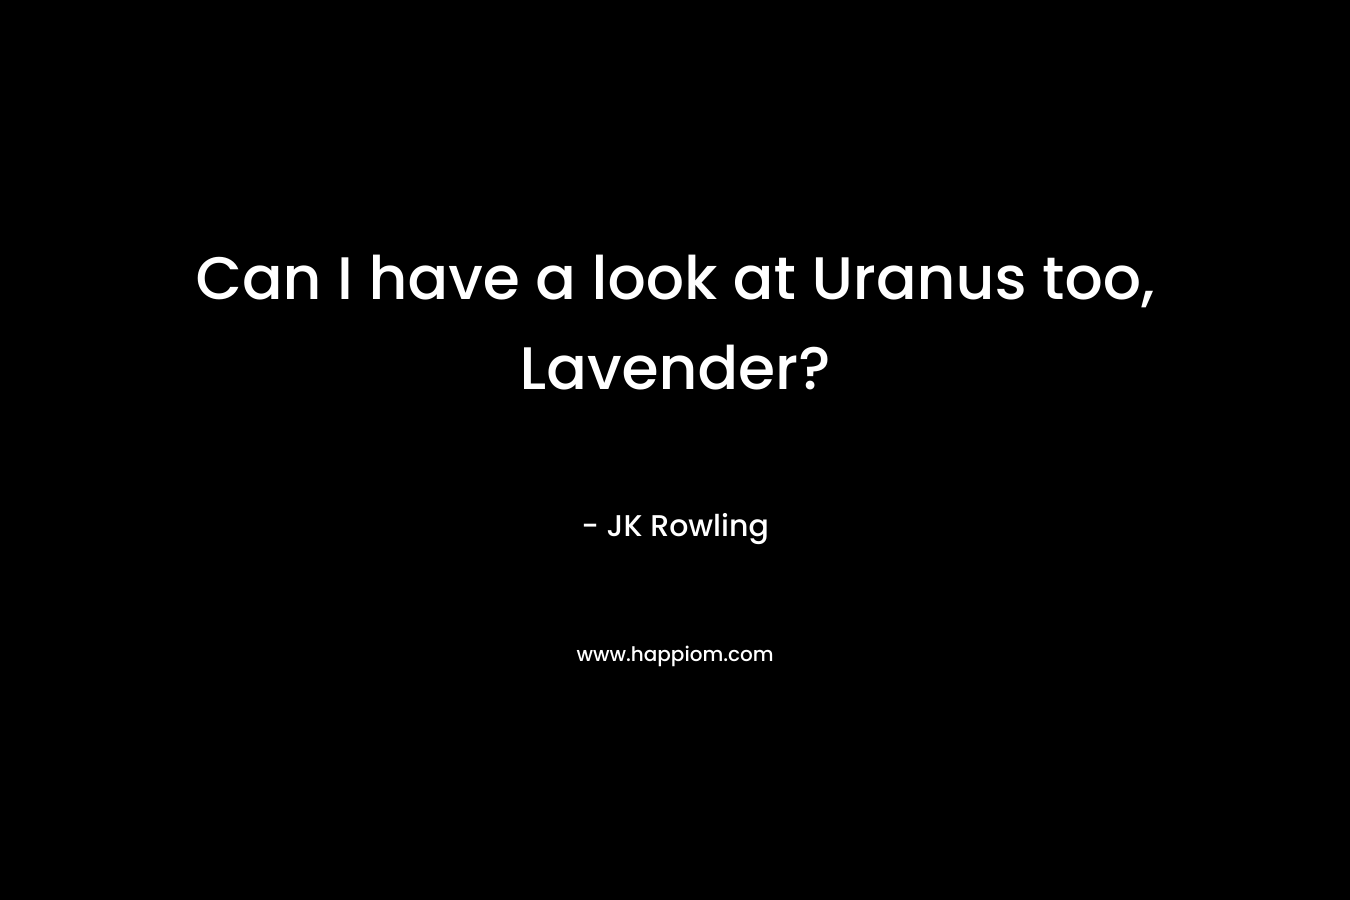 Can I have a look at Uranus too, Lavender?